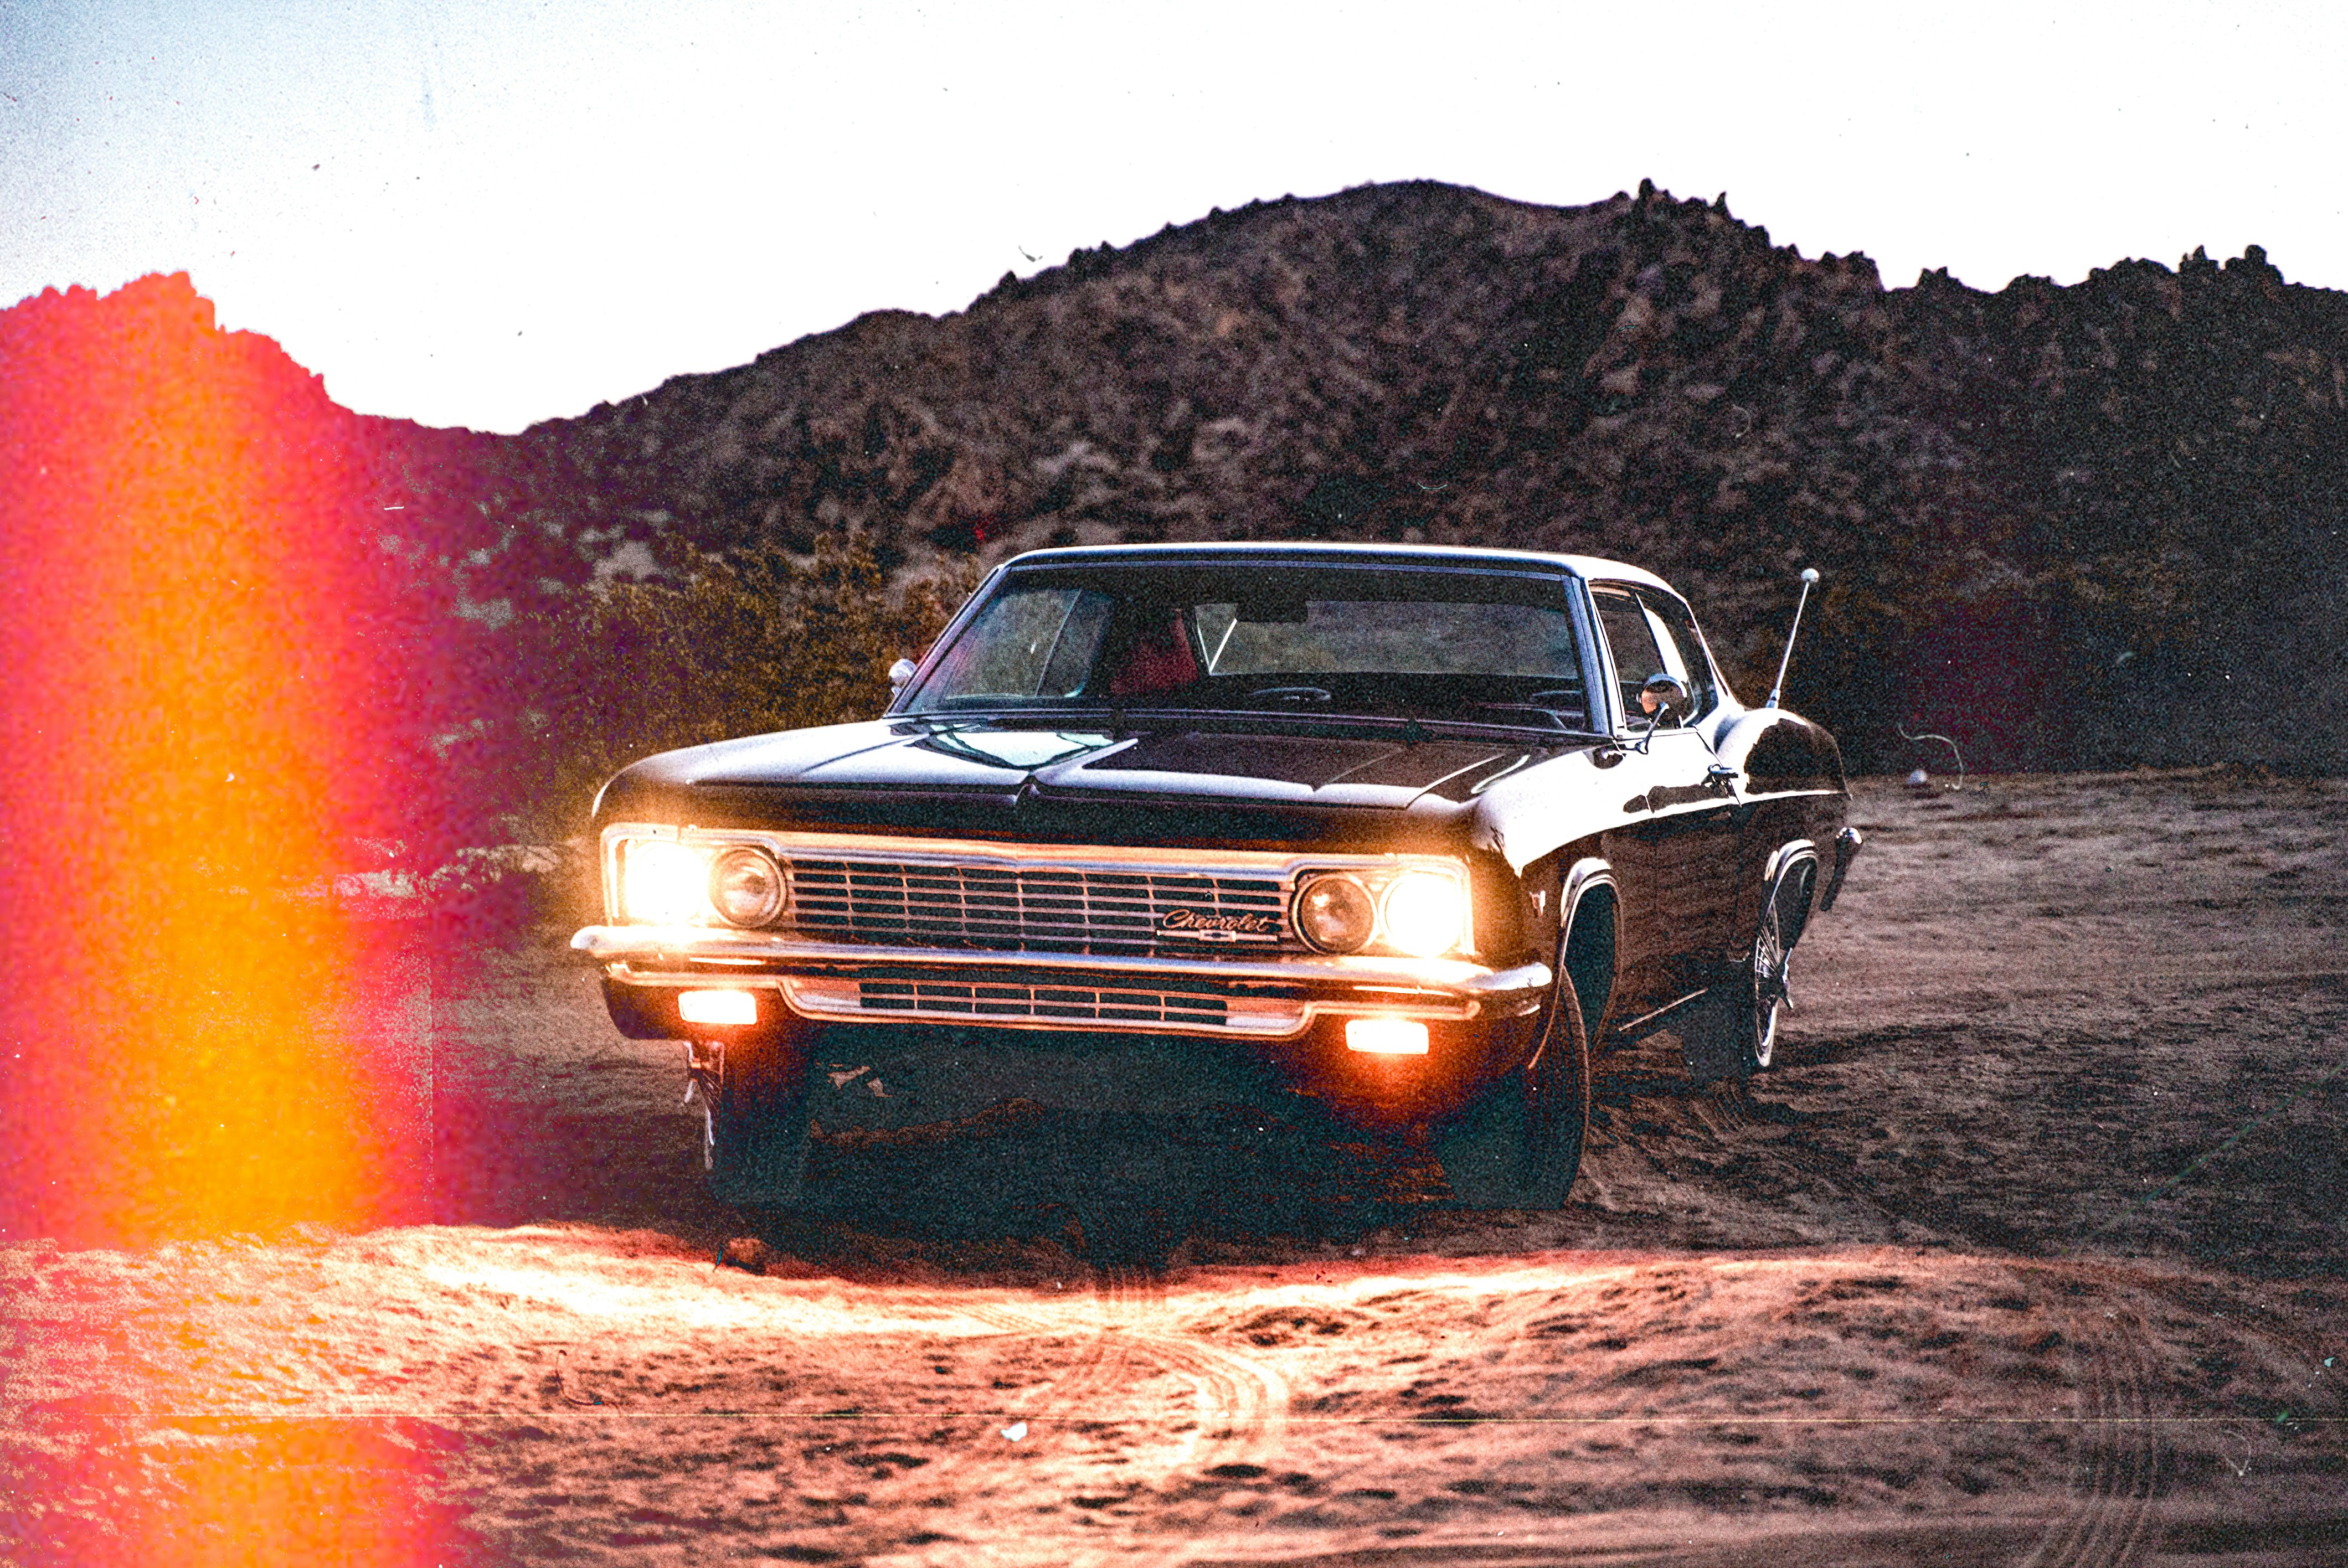 Desert shoot for Quincy with an old Chevrolet Caprice.